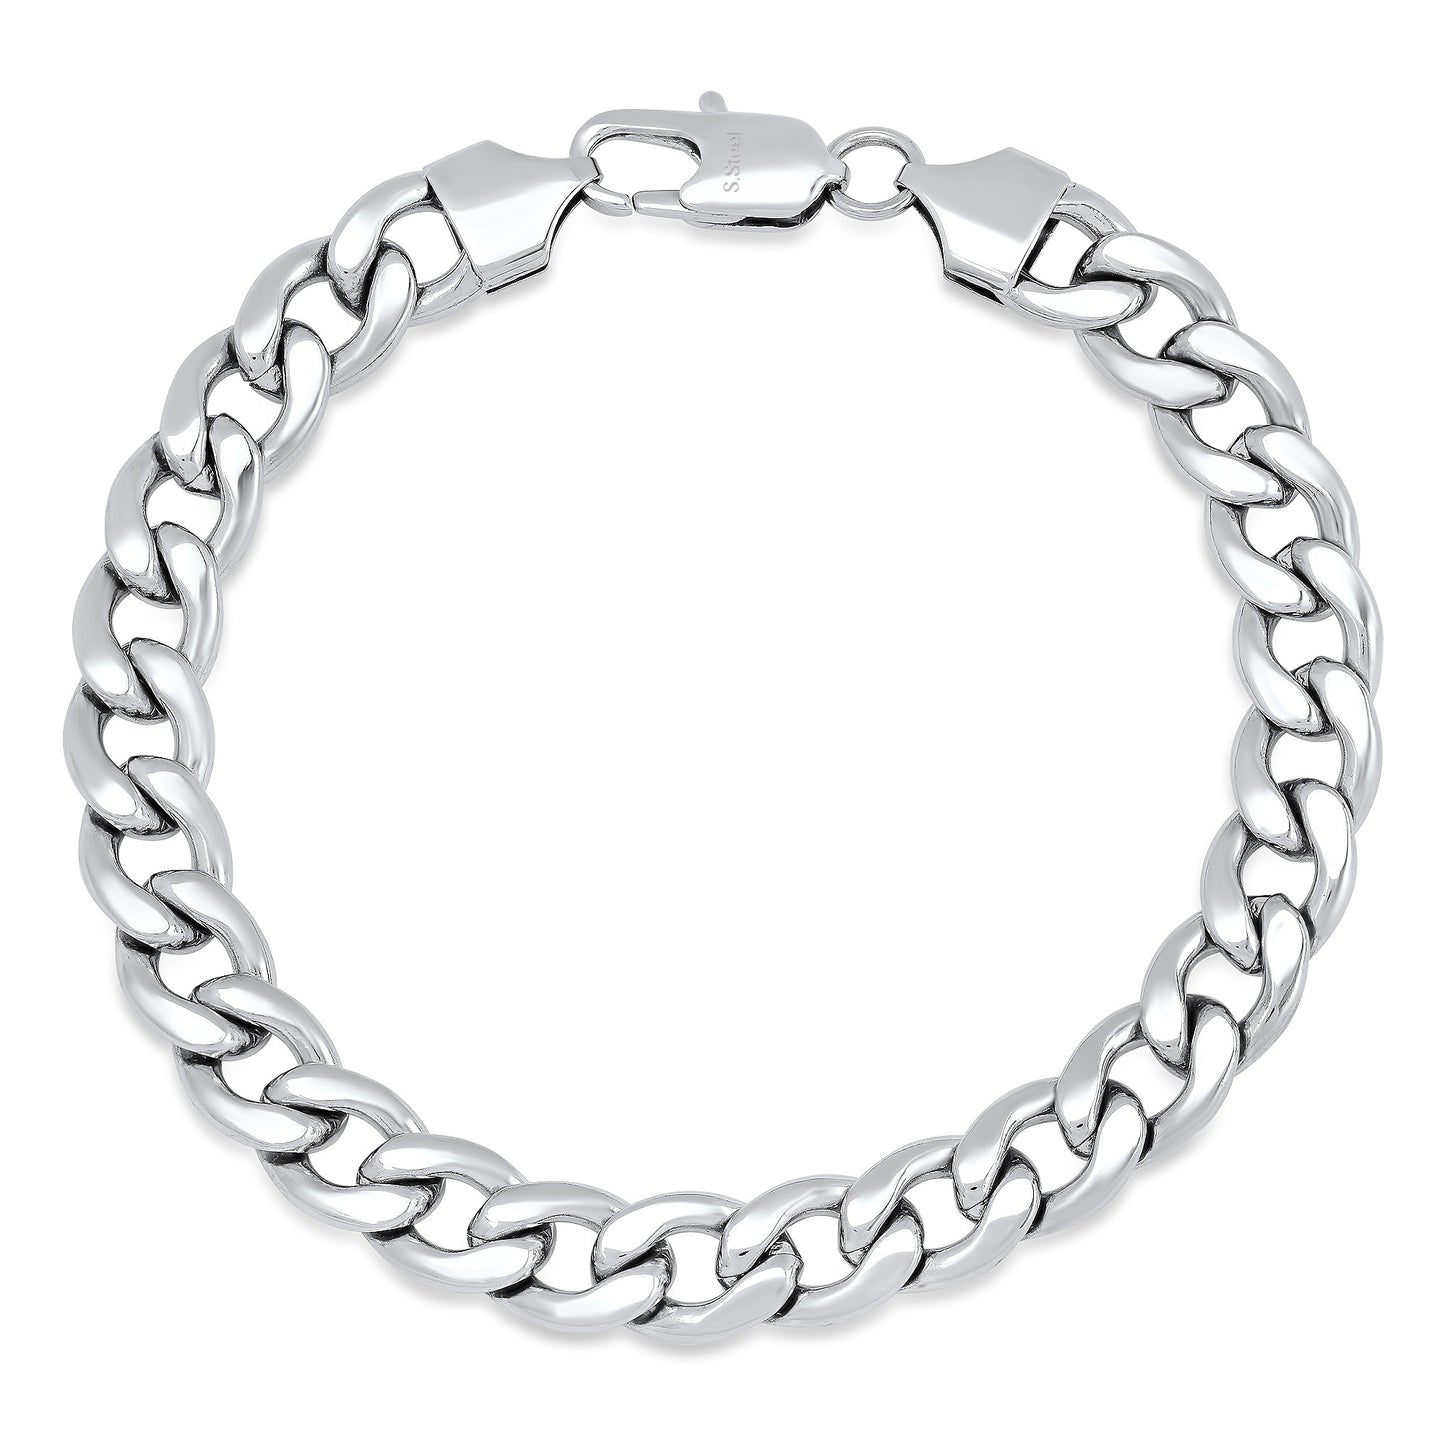 Men's 9.4mm High-Polished Stainless Steel Flat Curb Chain Bracelet (SKU: ST-SD1007B)